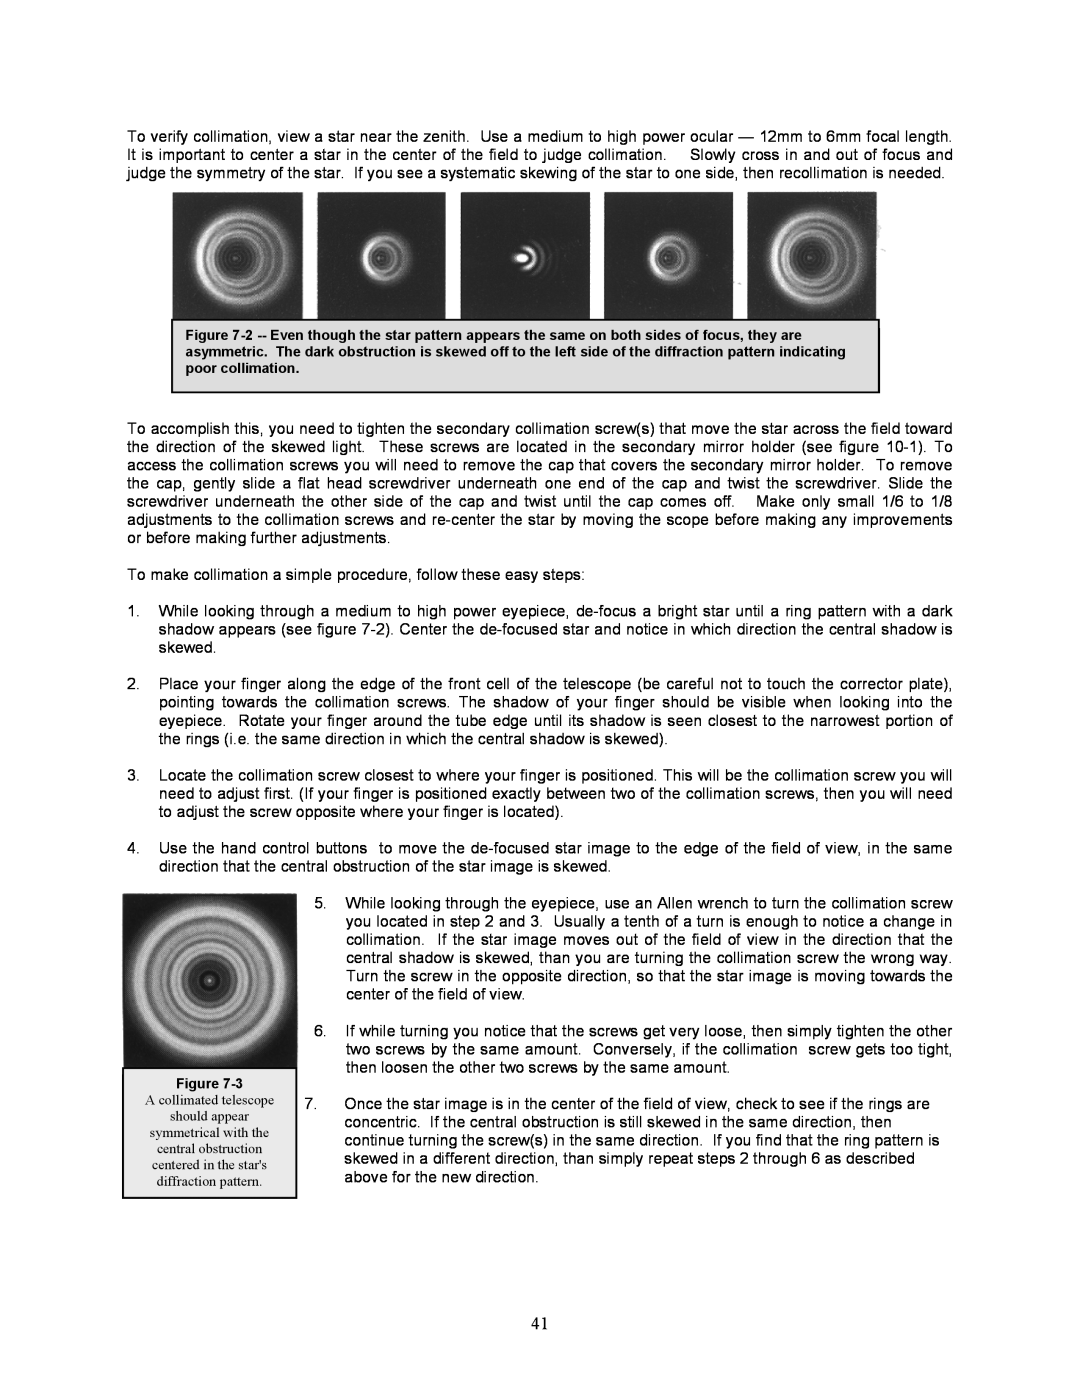 Celestron 8i manual To make collimation a simple procedure, follow these easy steps 